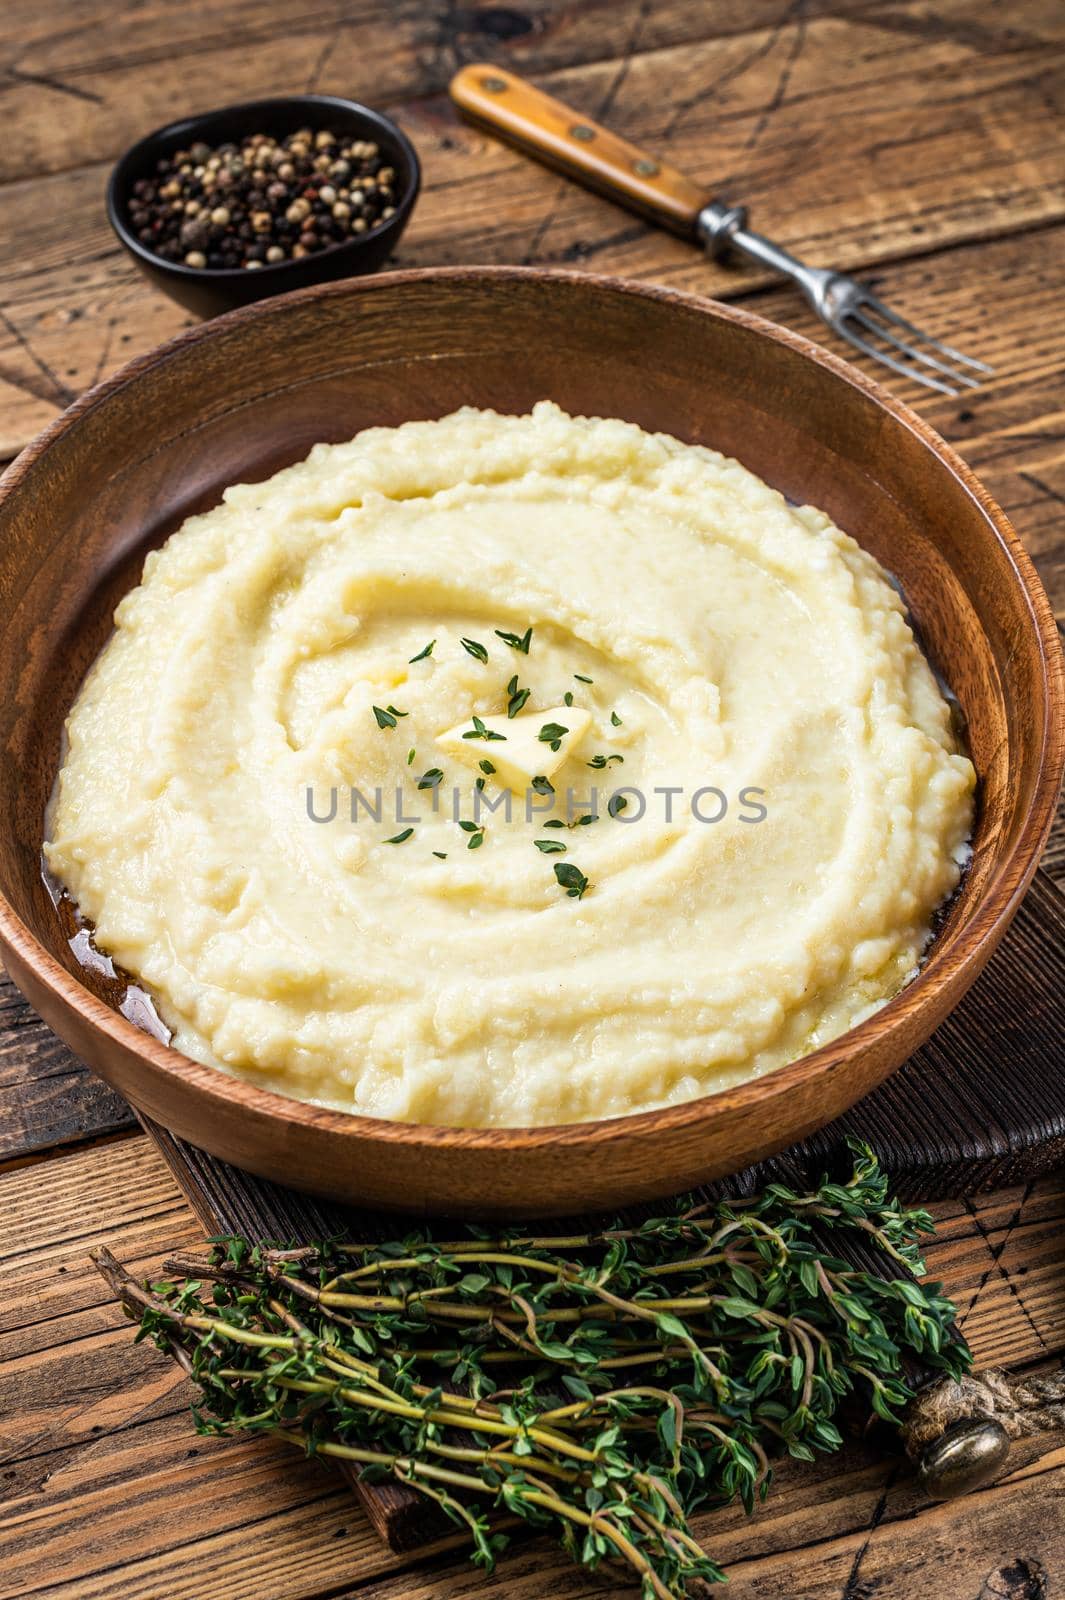 Mashed potatoes, boiled puree in a wooden plate. Wooden background. Top view.